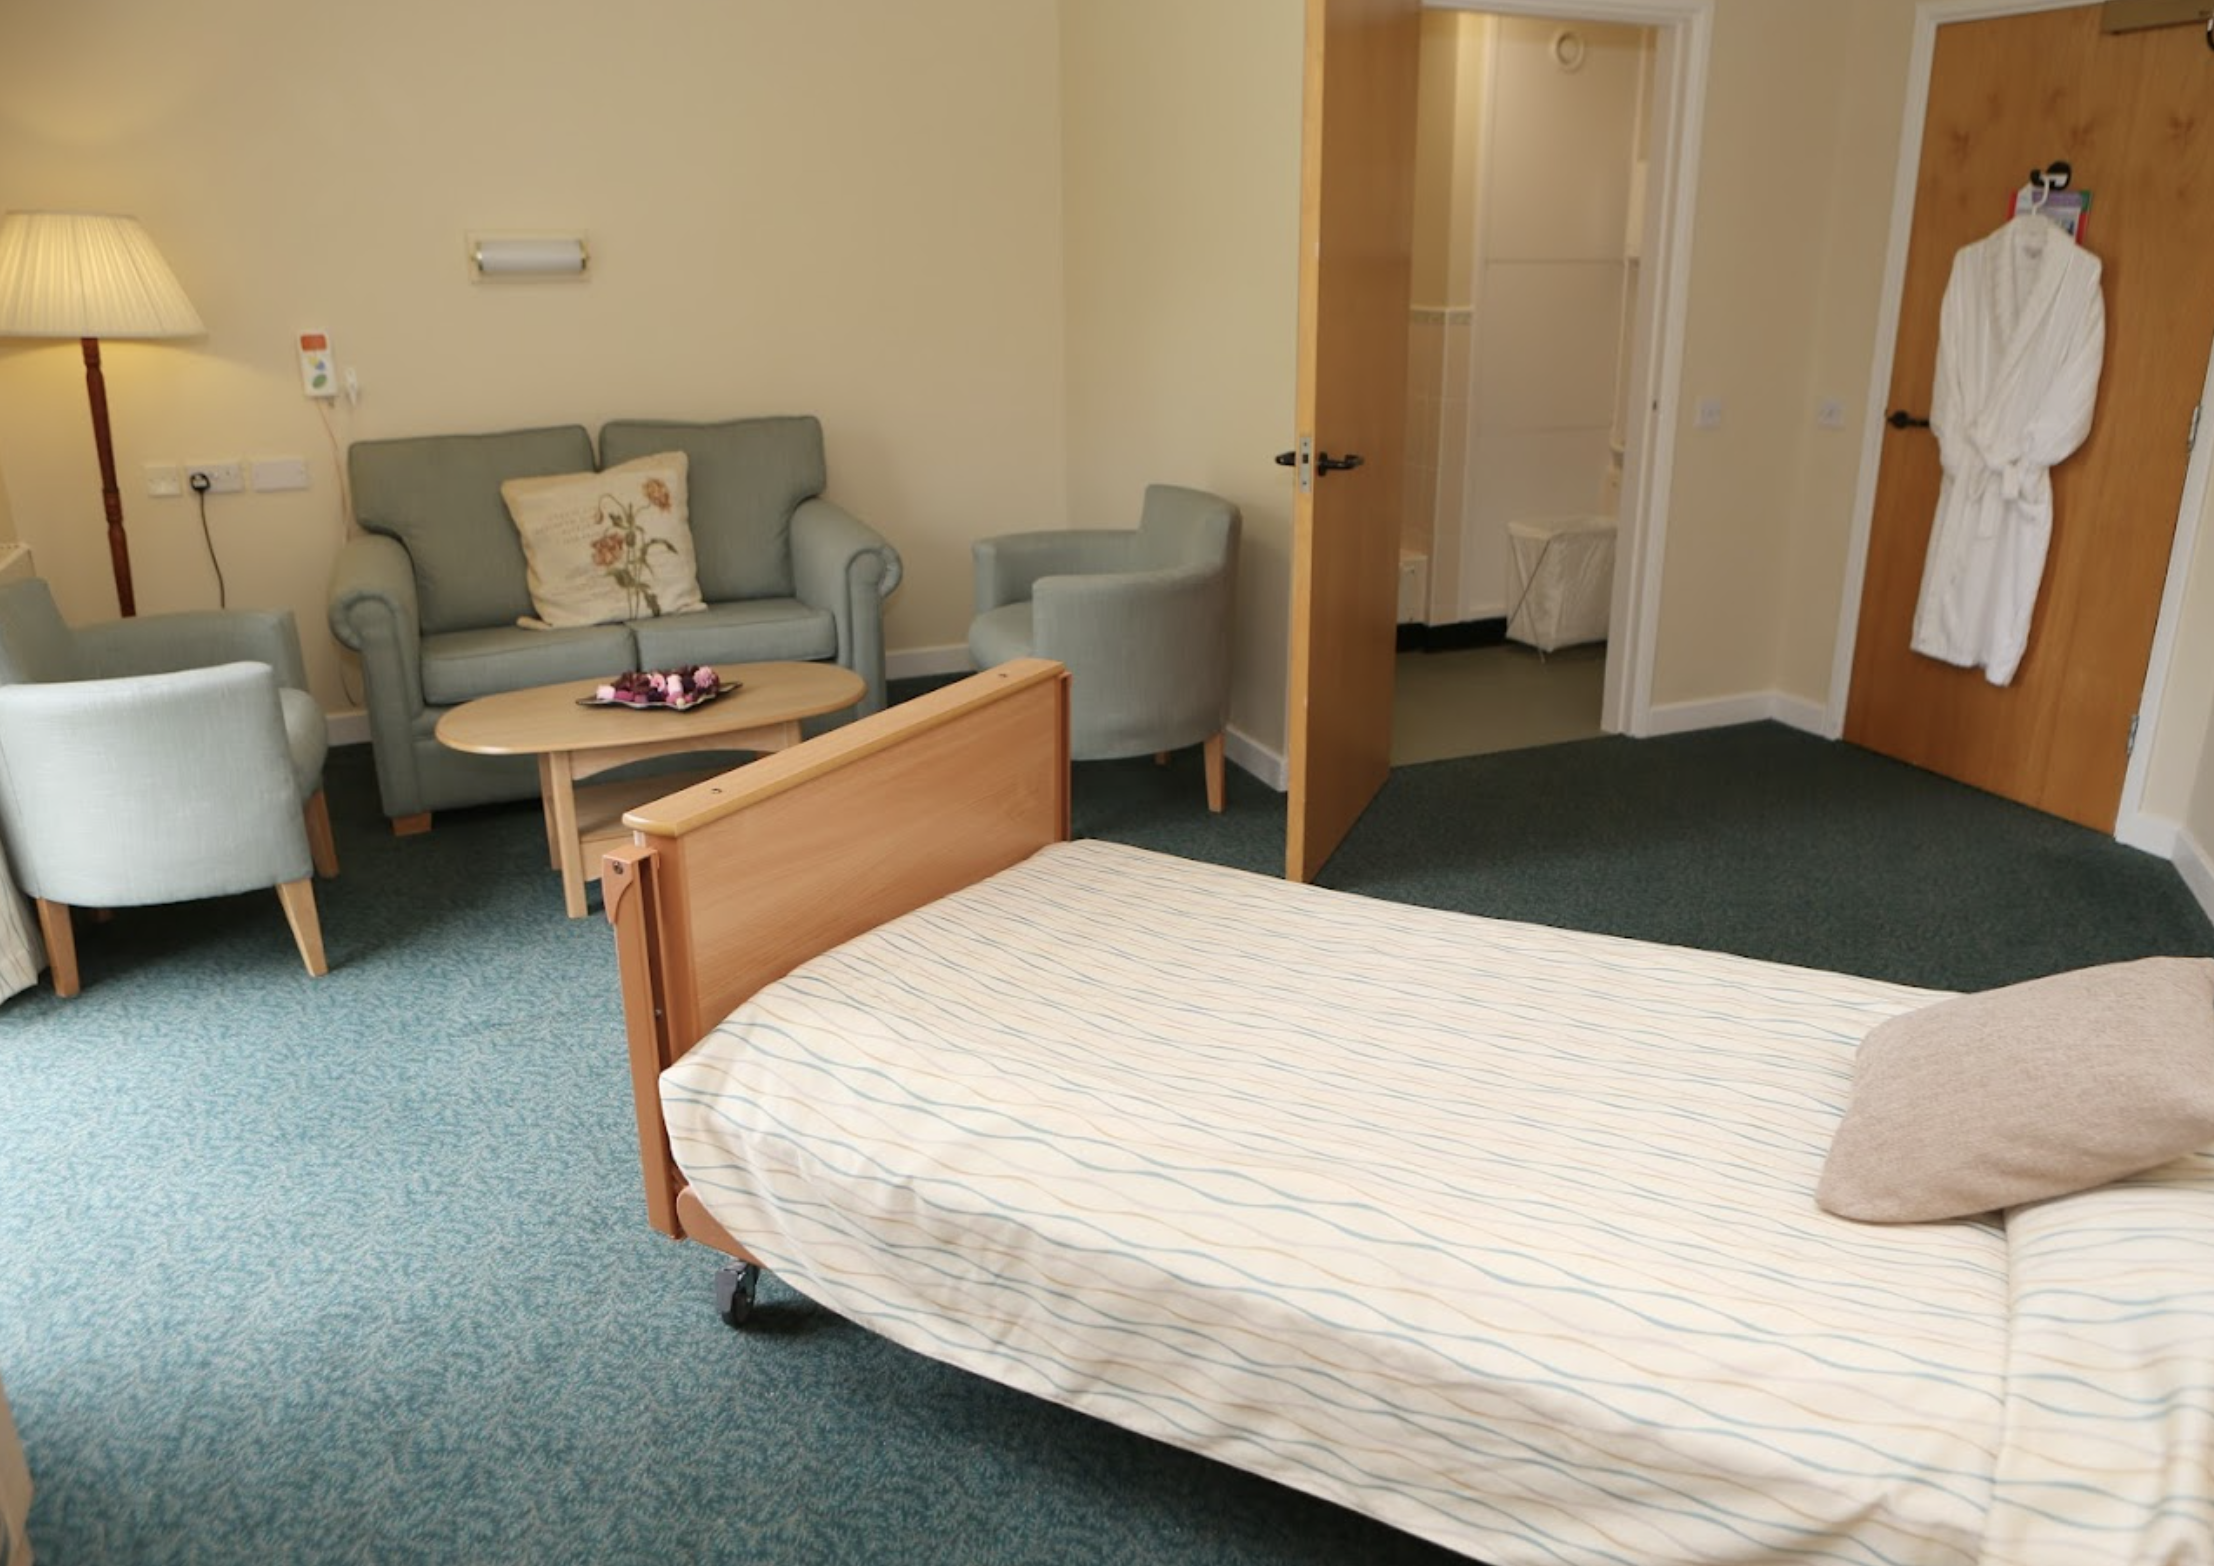 Bedroom of Aylesham Court care home in Leicester, Leicestershire